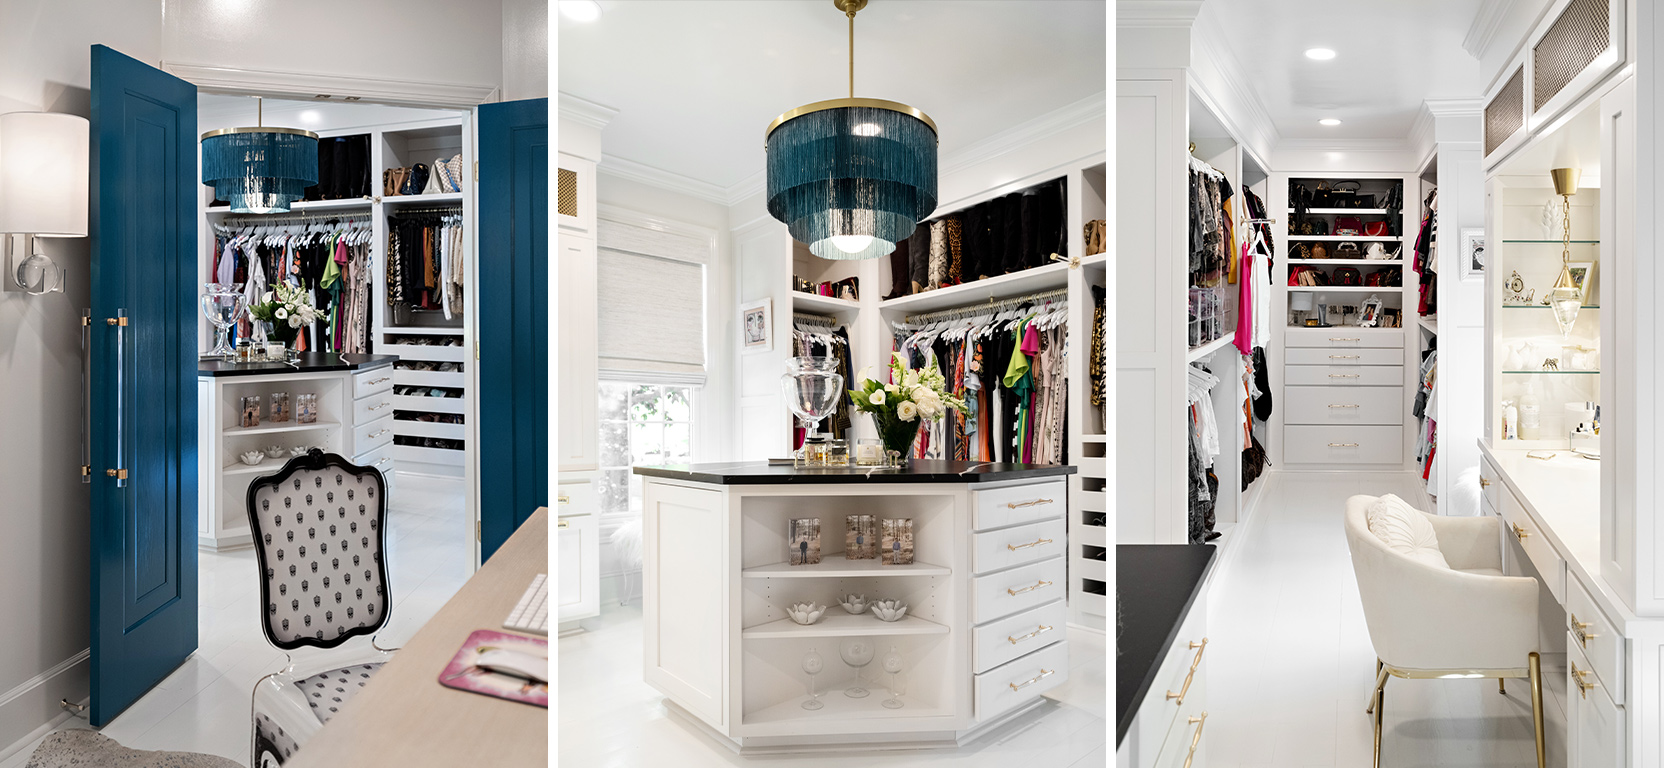 (left image): View from desk showing teal double doors with clear acrylic handles open to a large walk in closet beyond.  Alt text (middle image): Closer look at walk-in closet center island with black top, dark teal fringe chandelier, hanging clothes and window behind. (right image): Vanity space in white walk-in closet with gold accents and recessed lighting.